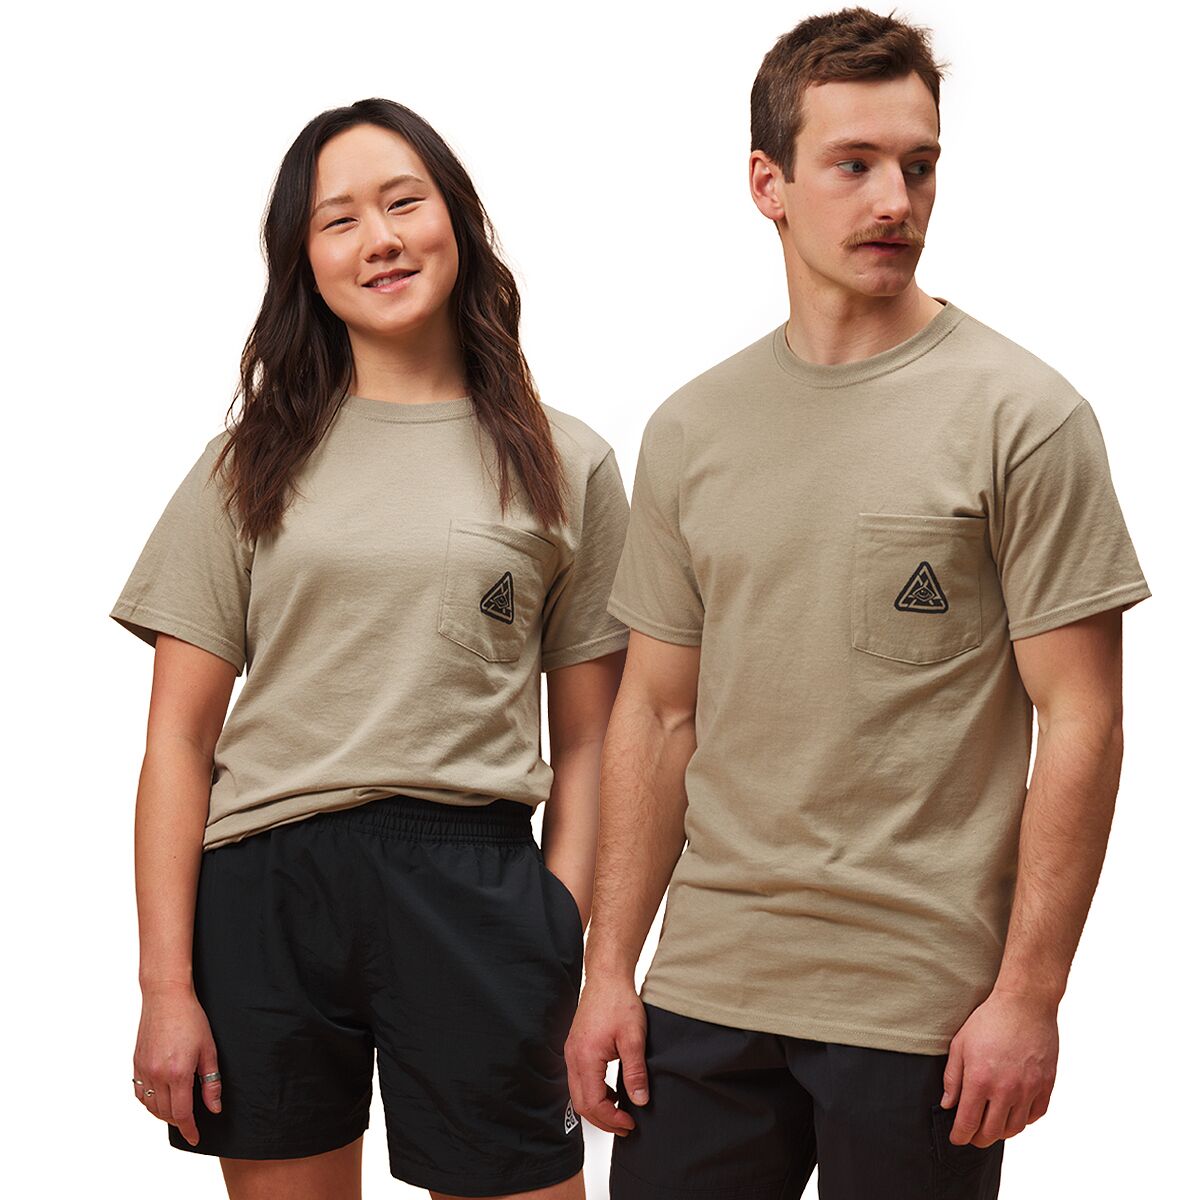 Backcountry Natural Selection Tour JH Bison Short-Sleeve T-Shirt